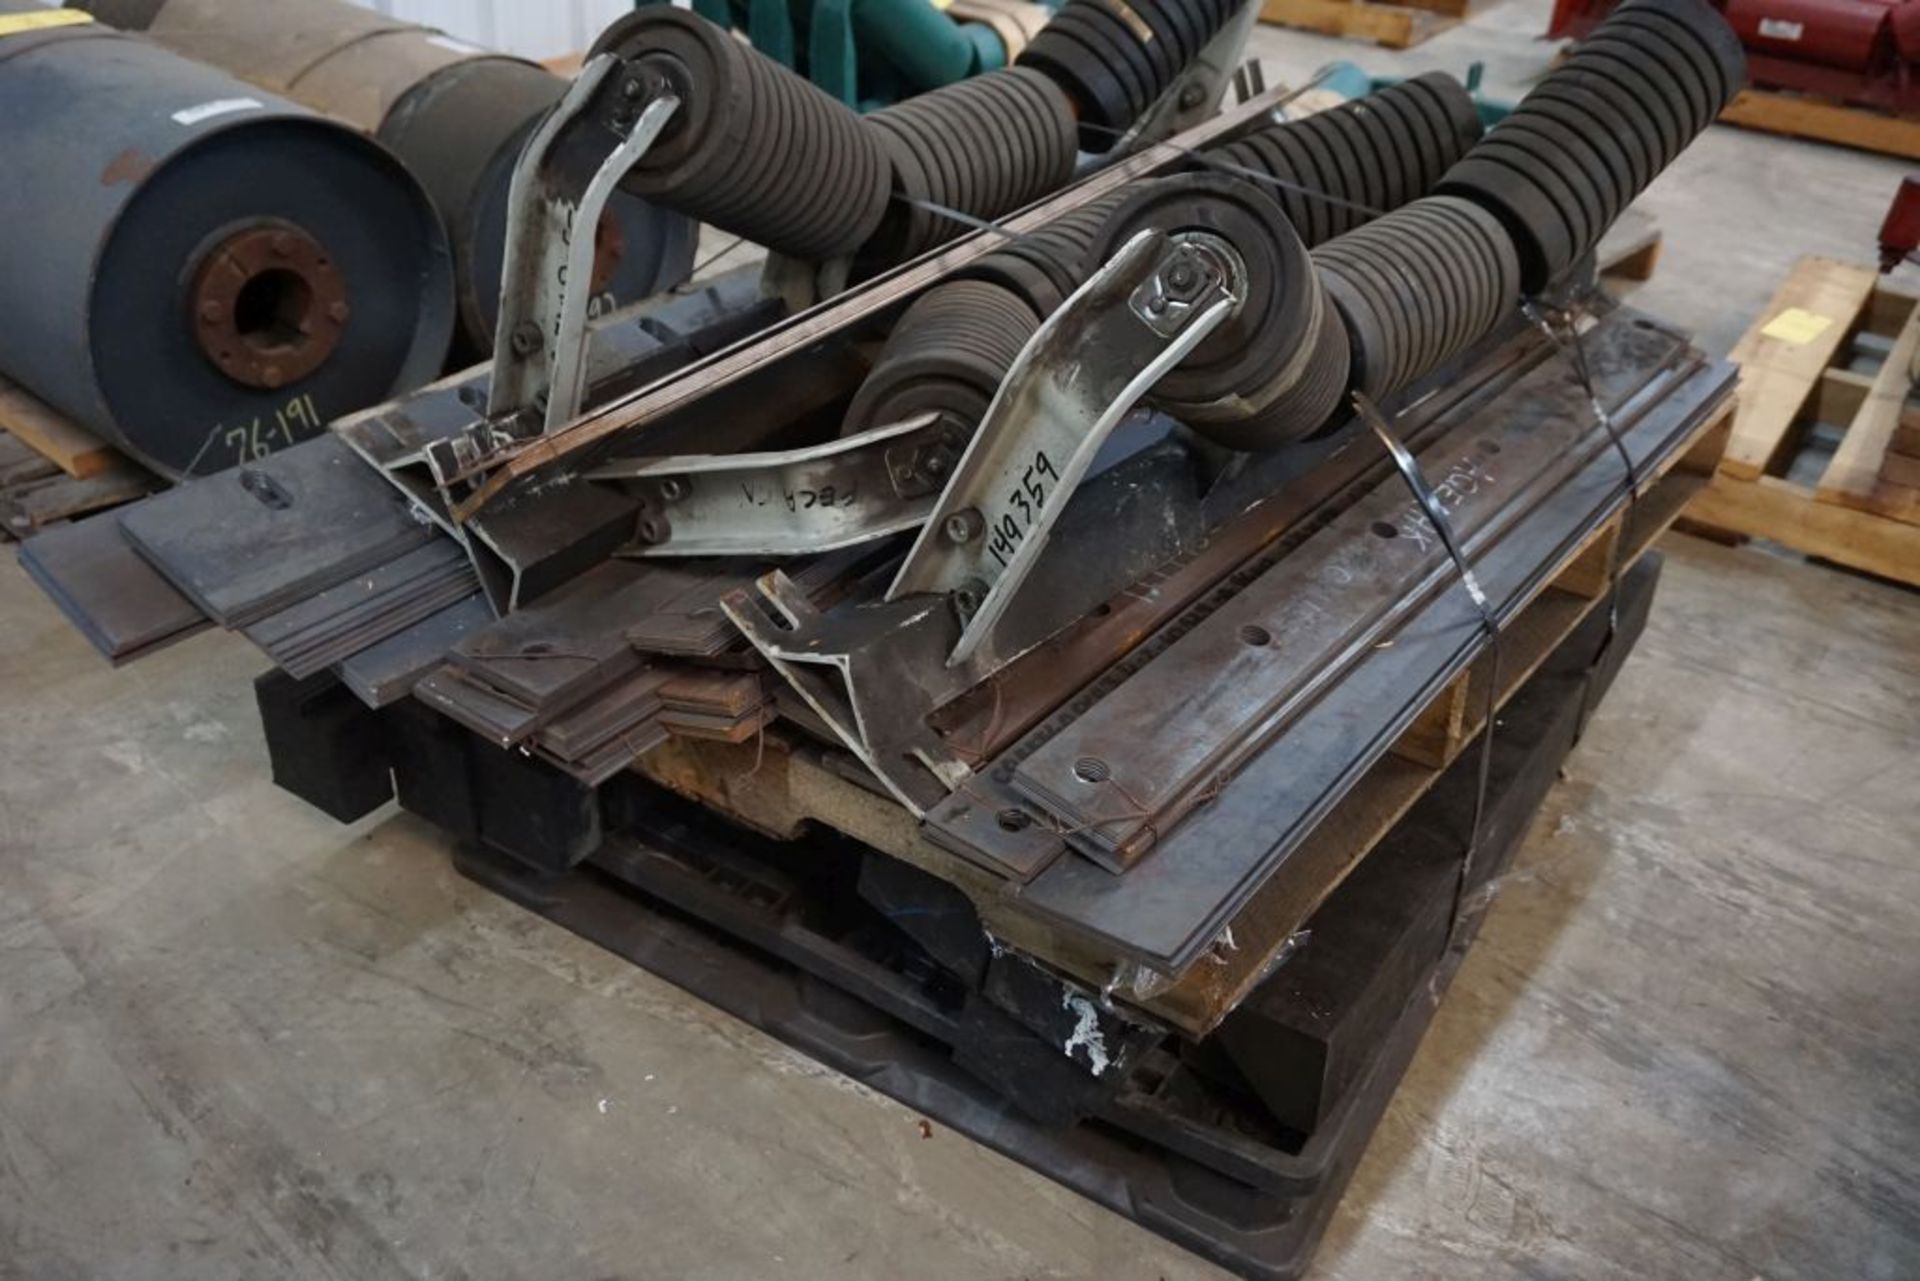 Lot of (5) 6"Diameter Training Idlers|34" Working Width; 54" Overall Width|Lot Loading Fee: $5.00 - Image 4 of 6